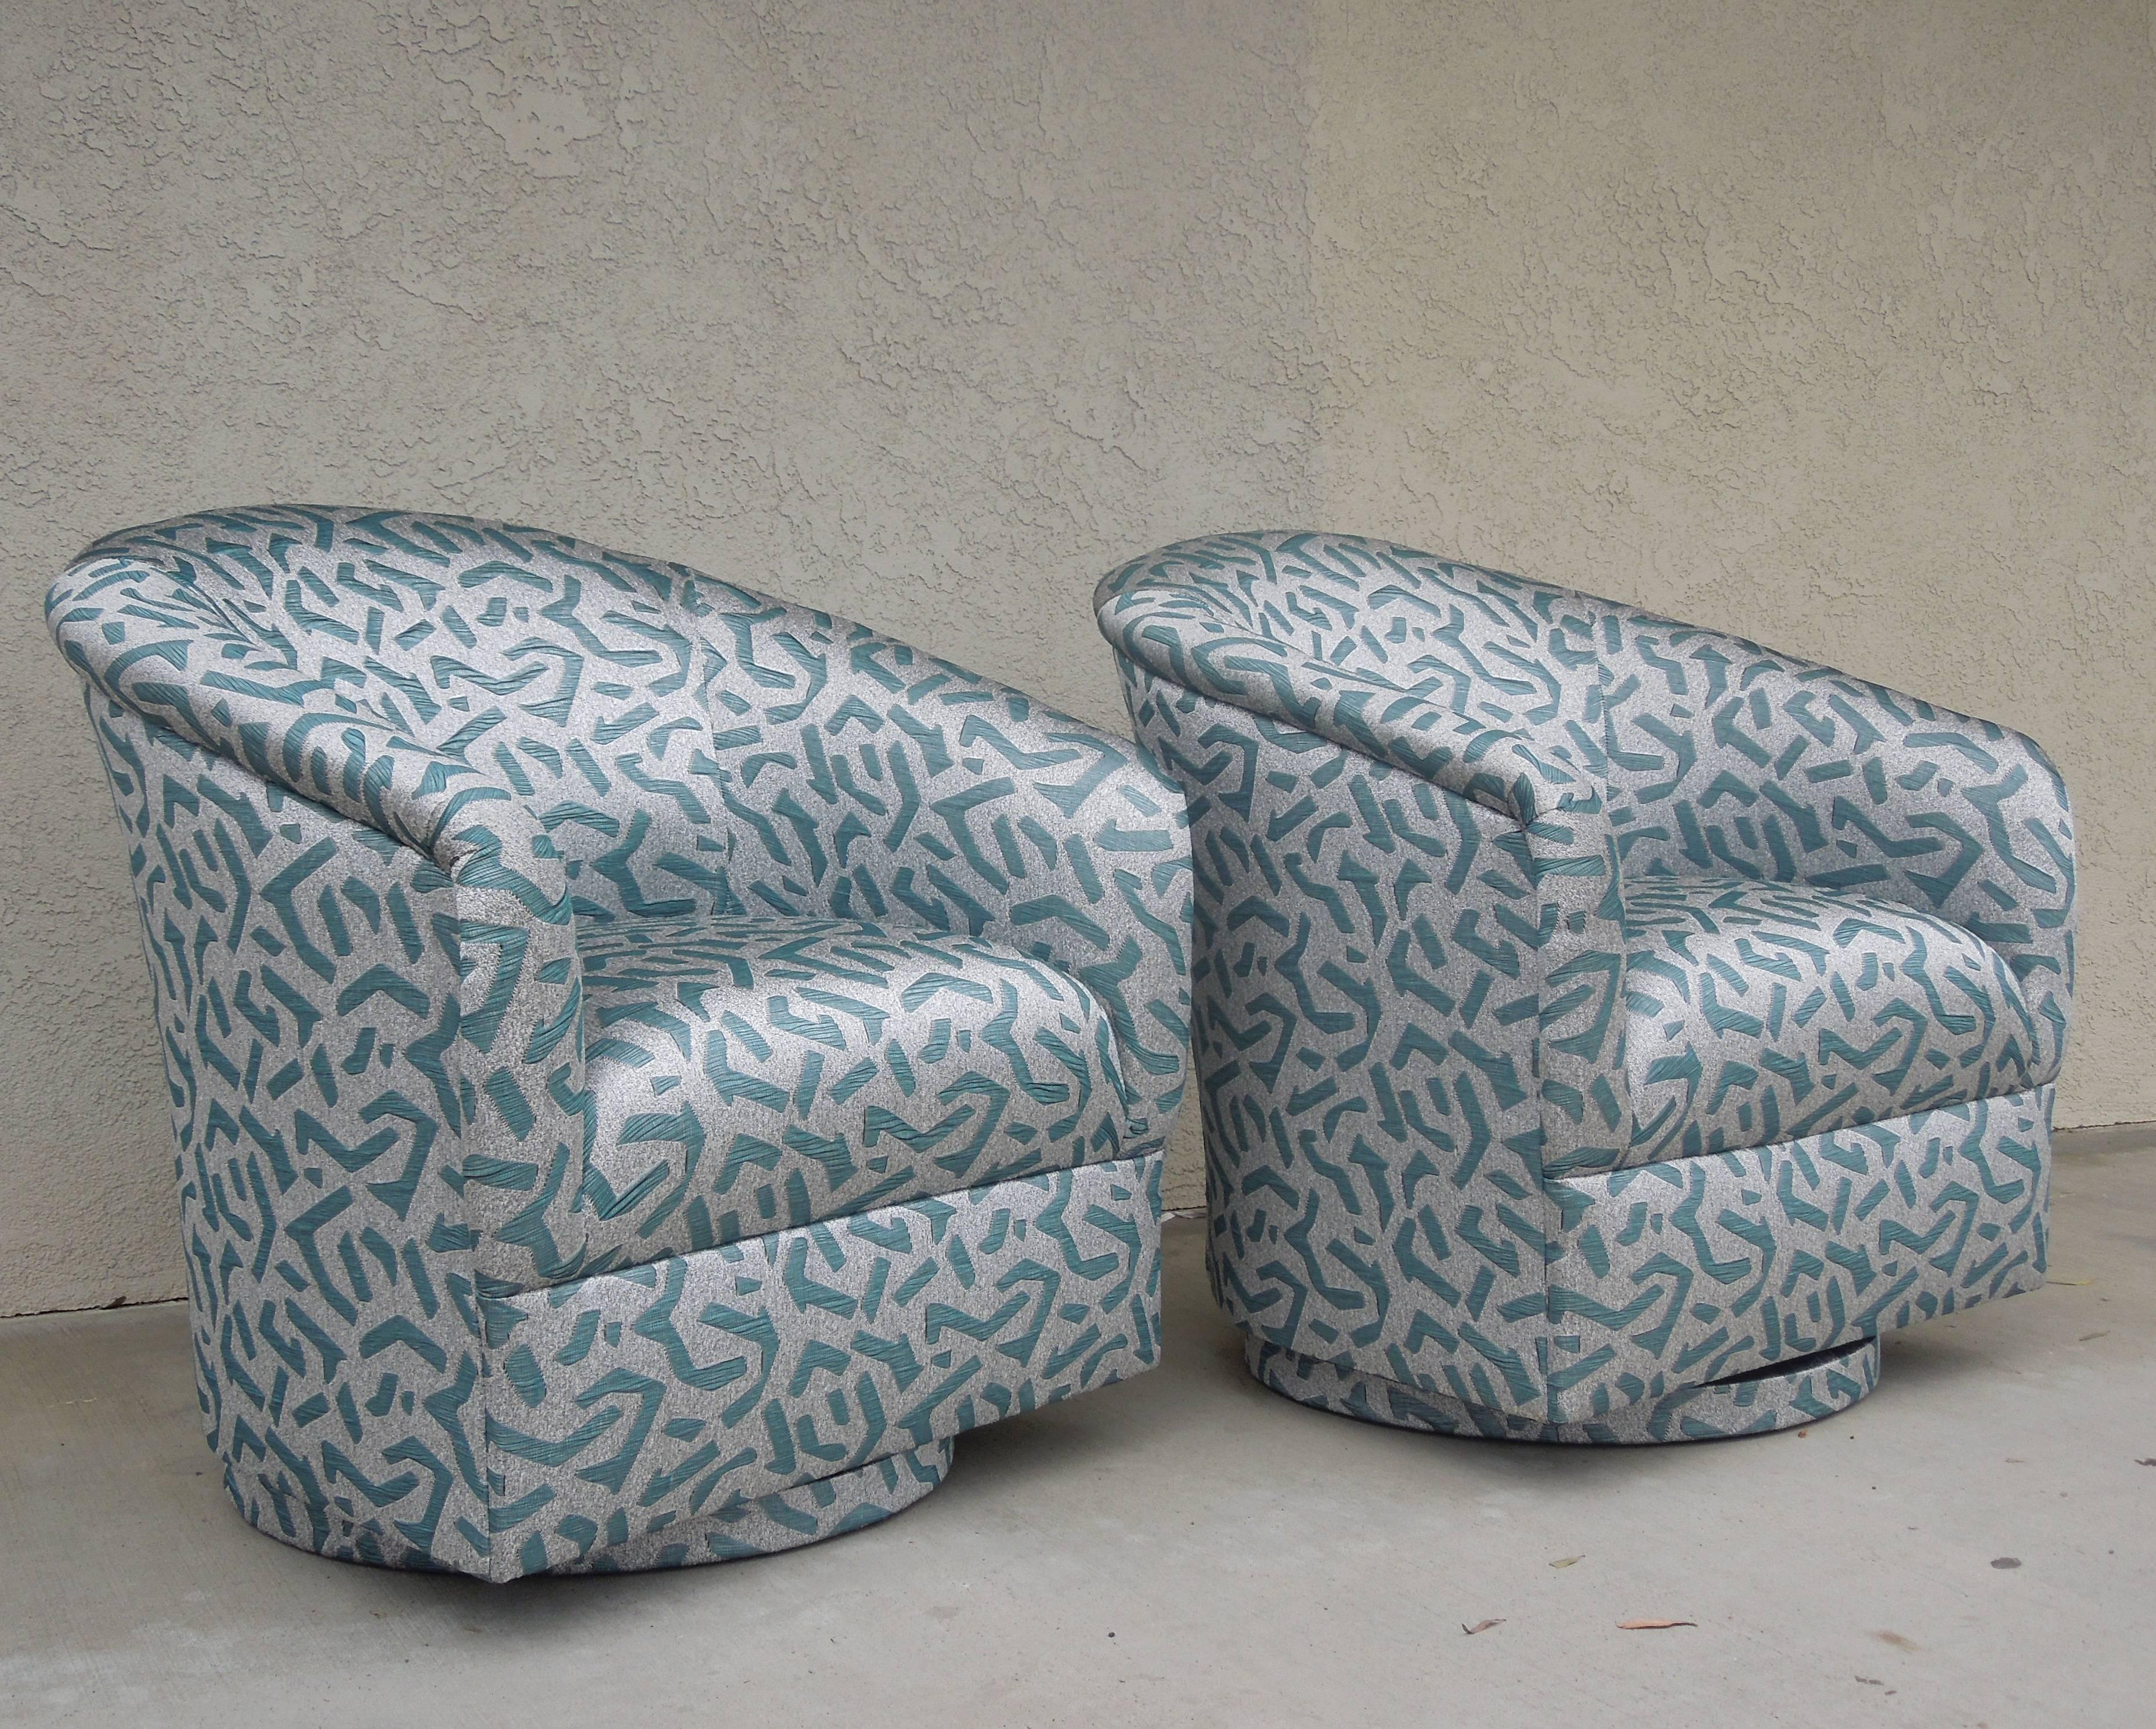 Newly upholstered in super high end European Jaquard in silver and turquoise mettalic 